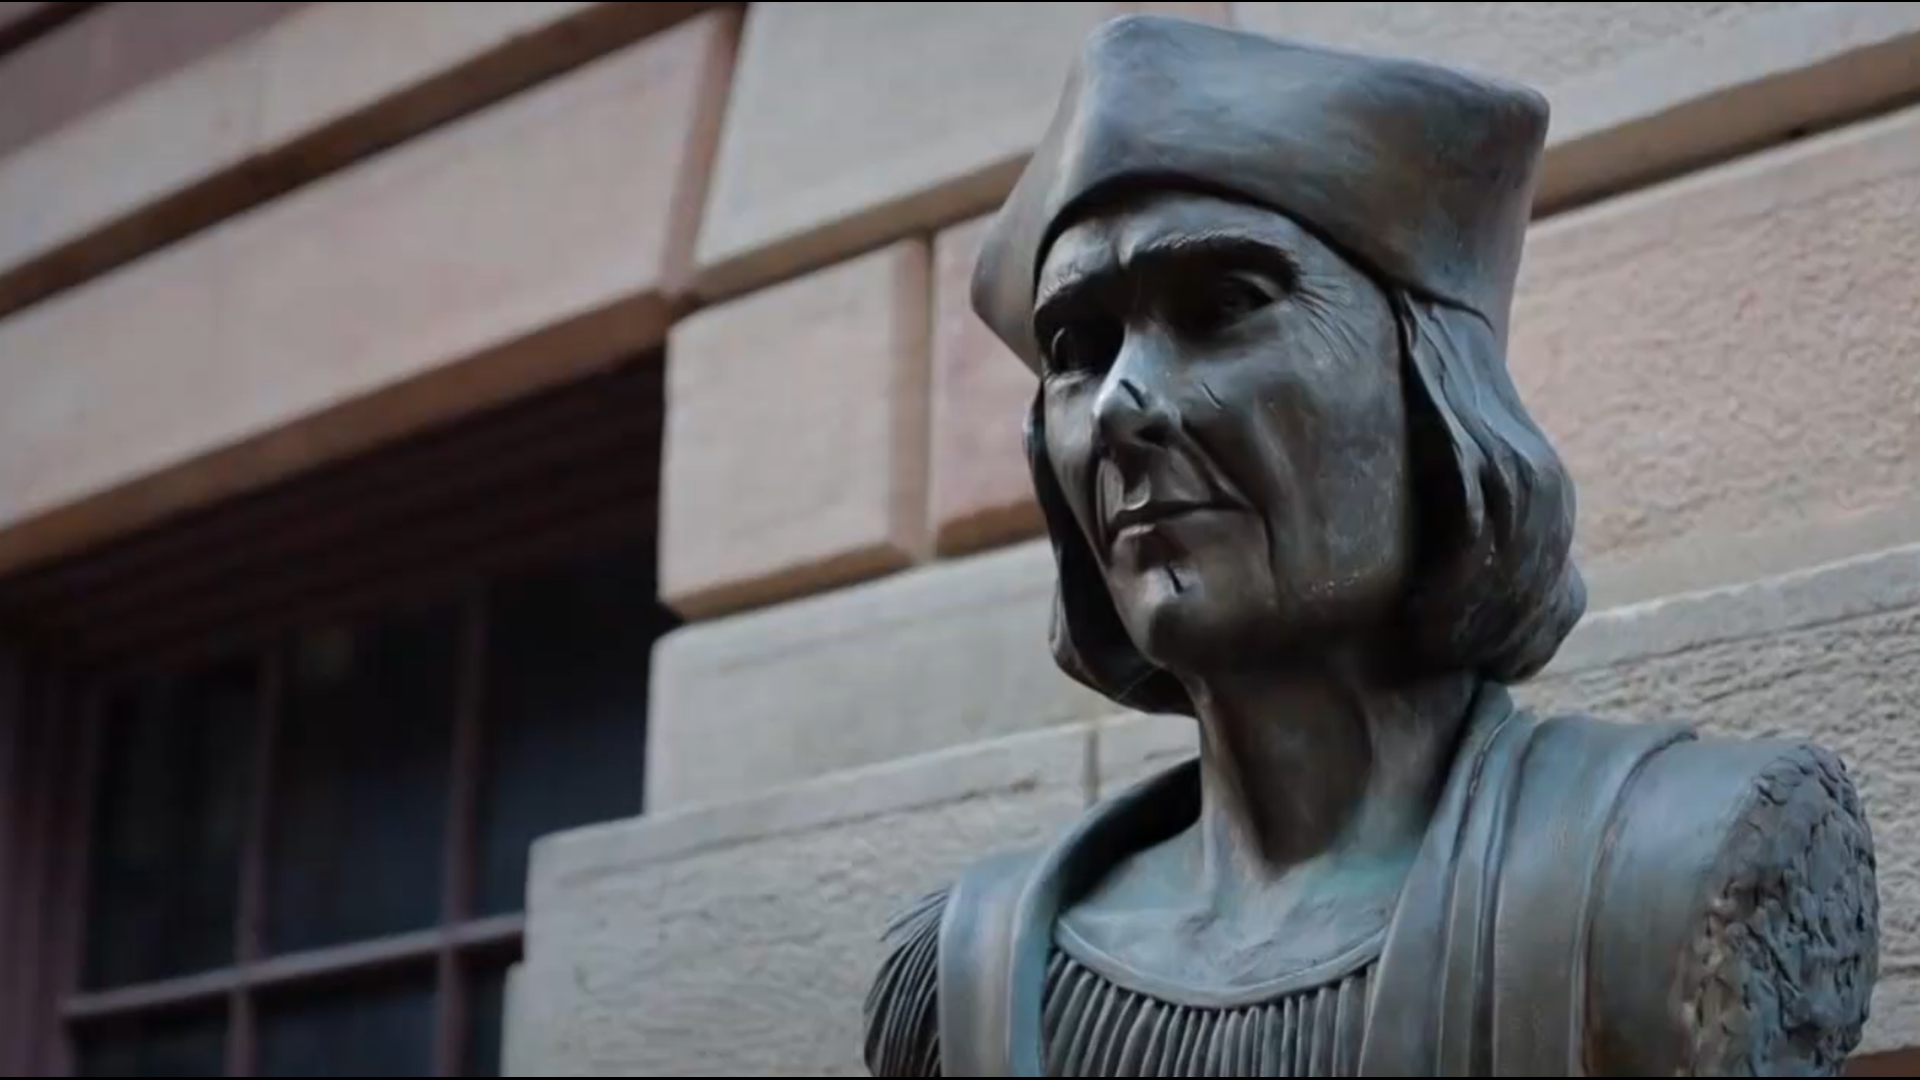 Columbus Day highlights a nationwide debate over our nation's legacy.